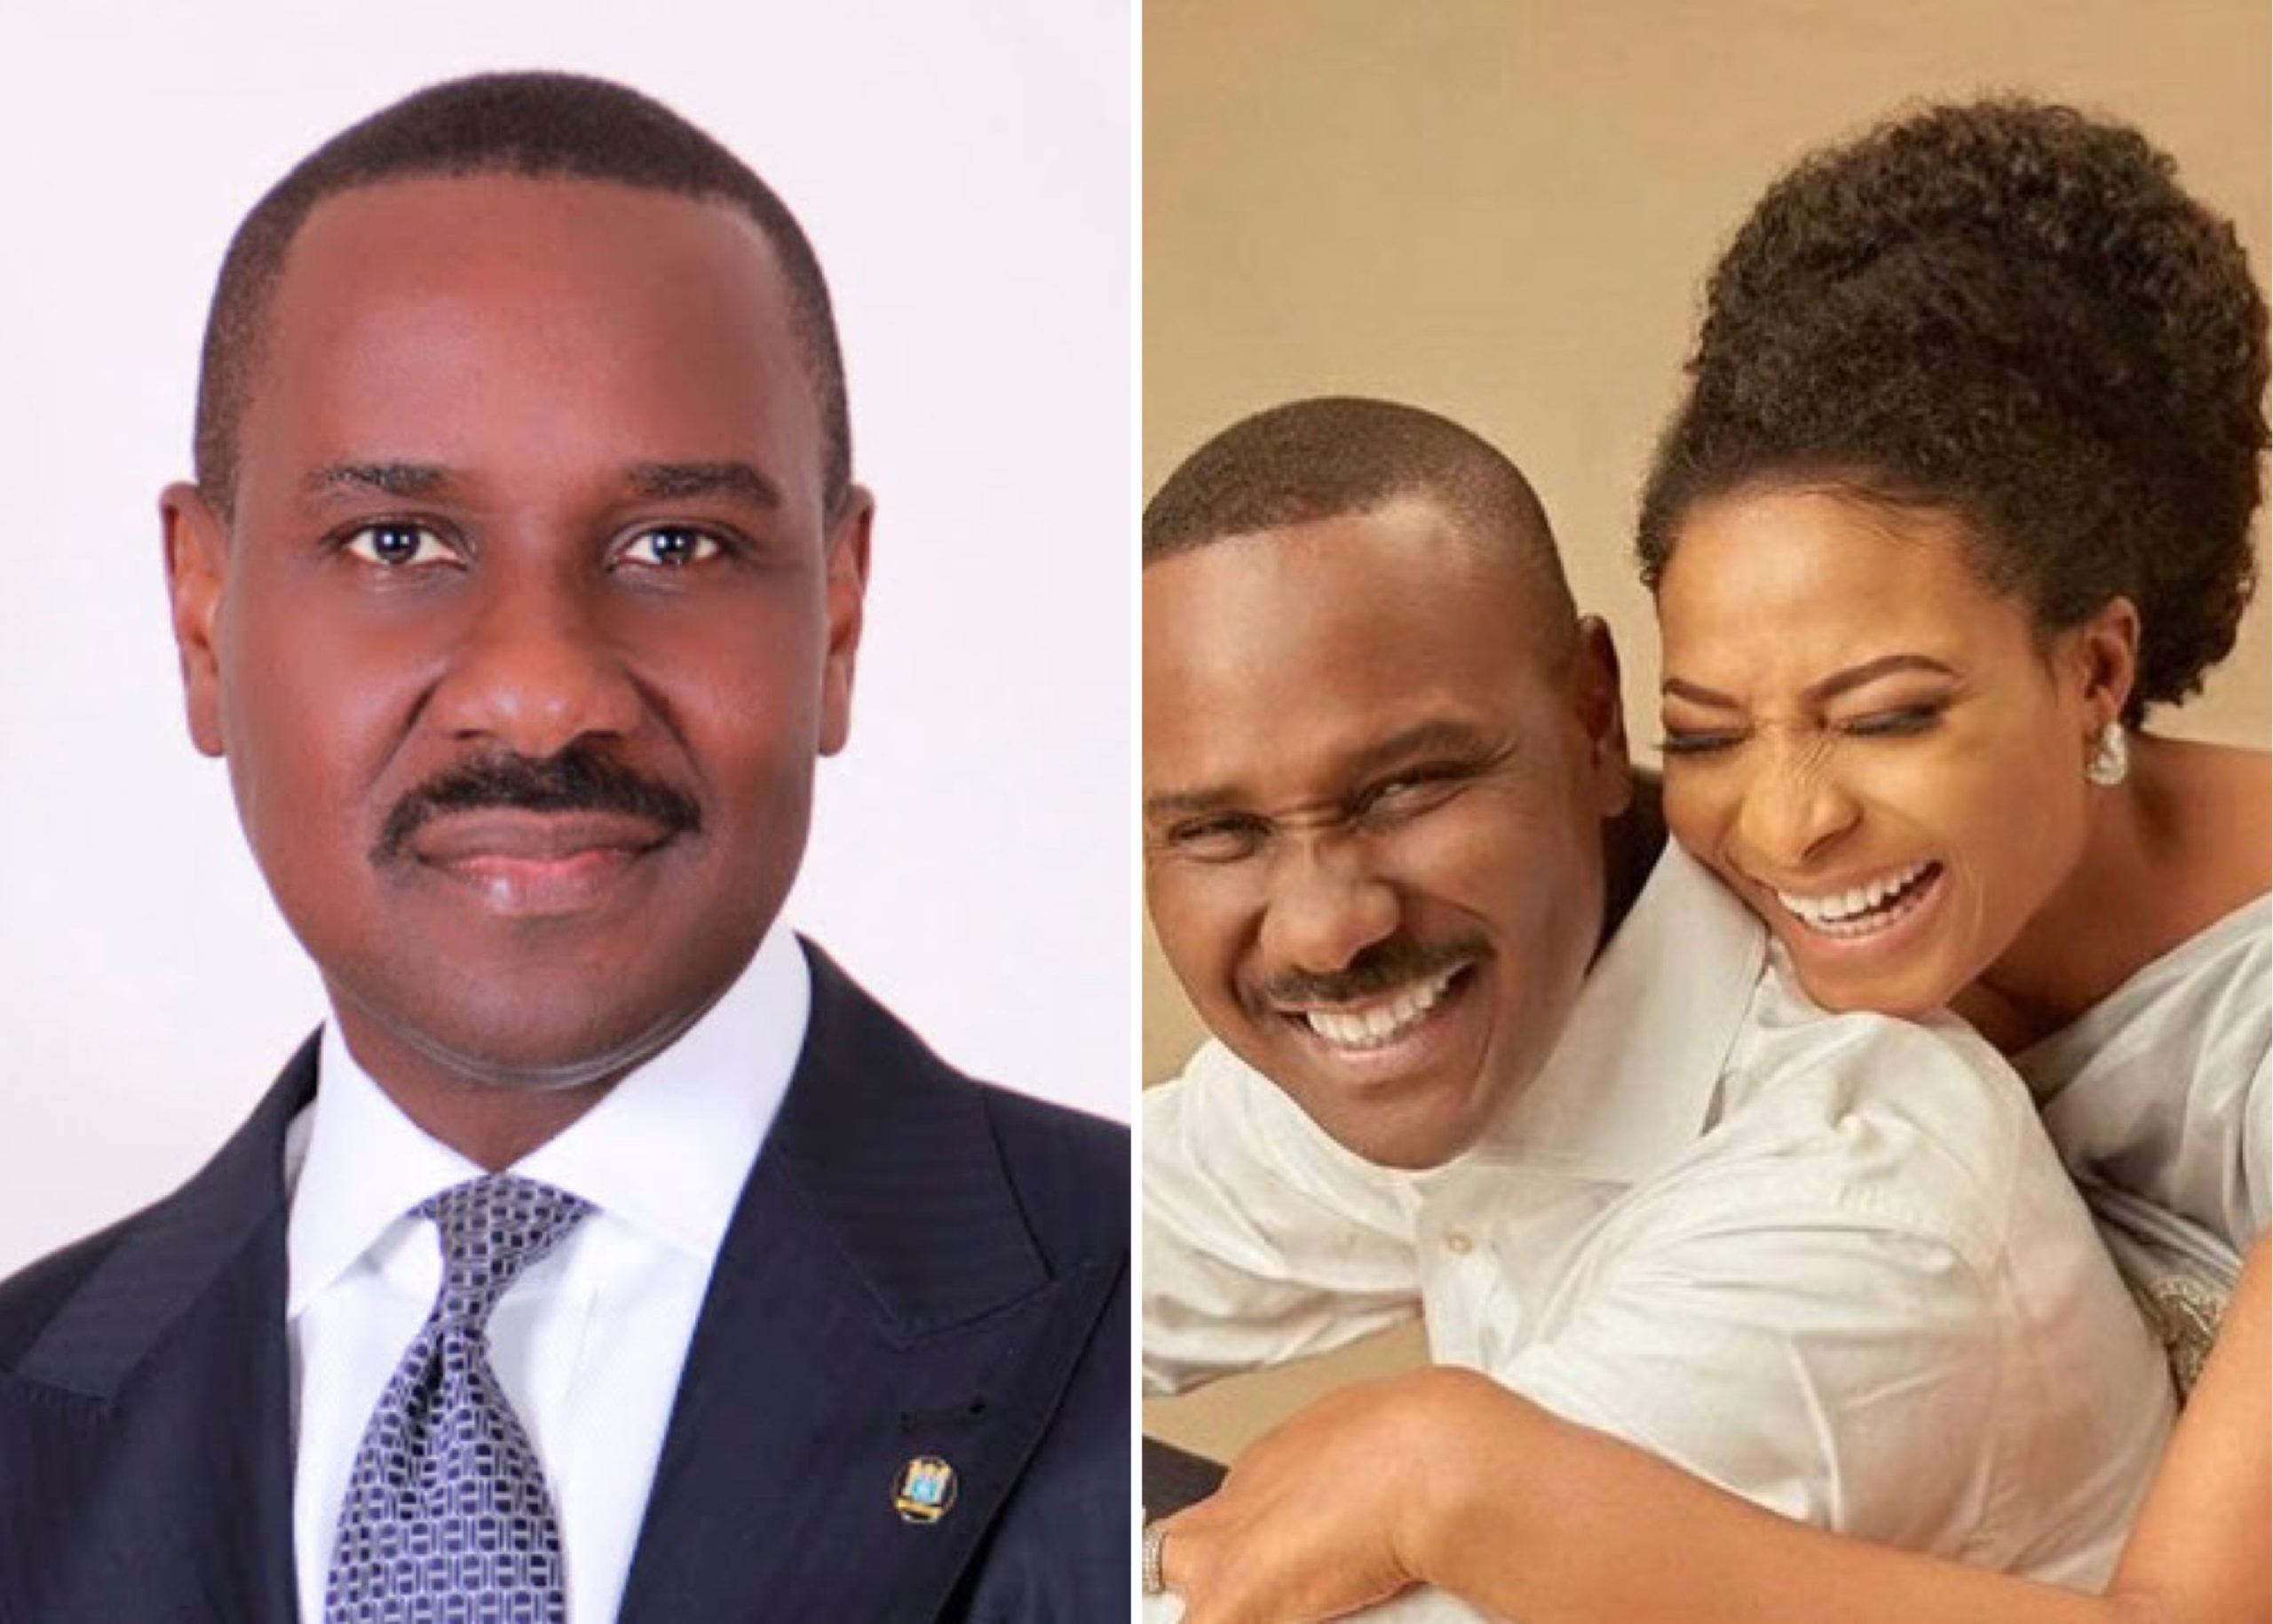 I Gave All To Ibidunni, I Don’t Have Much To Give To Anybody - Pastor Ituah Ighodalo Speaks On Remarrying Following Wife’s Death